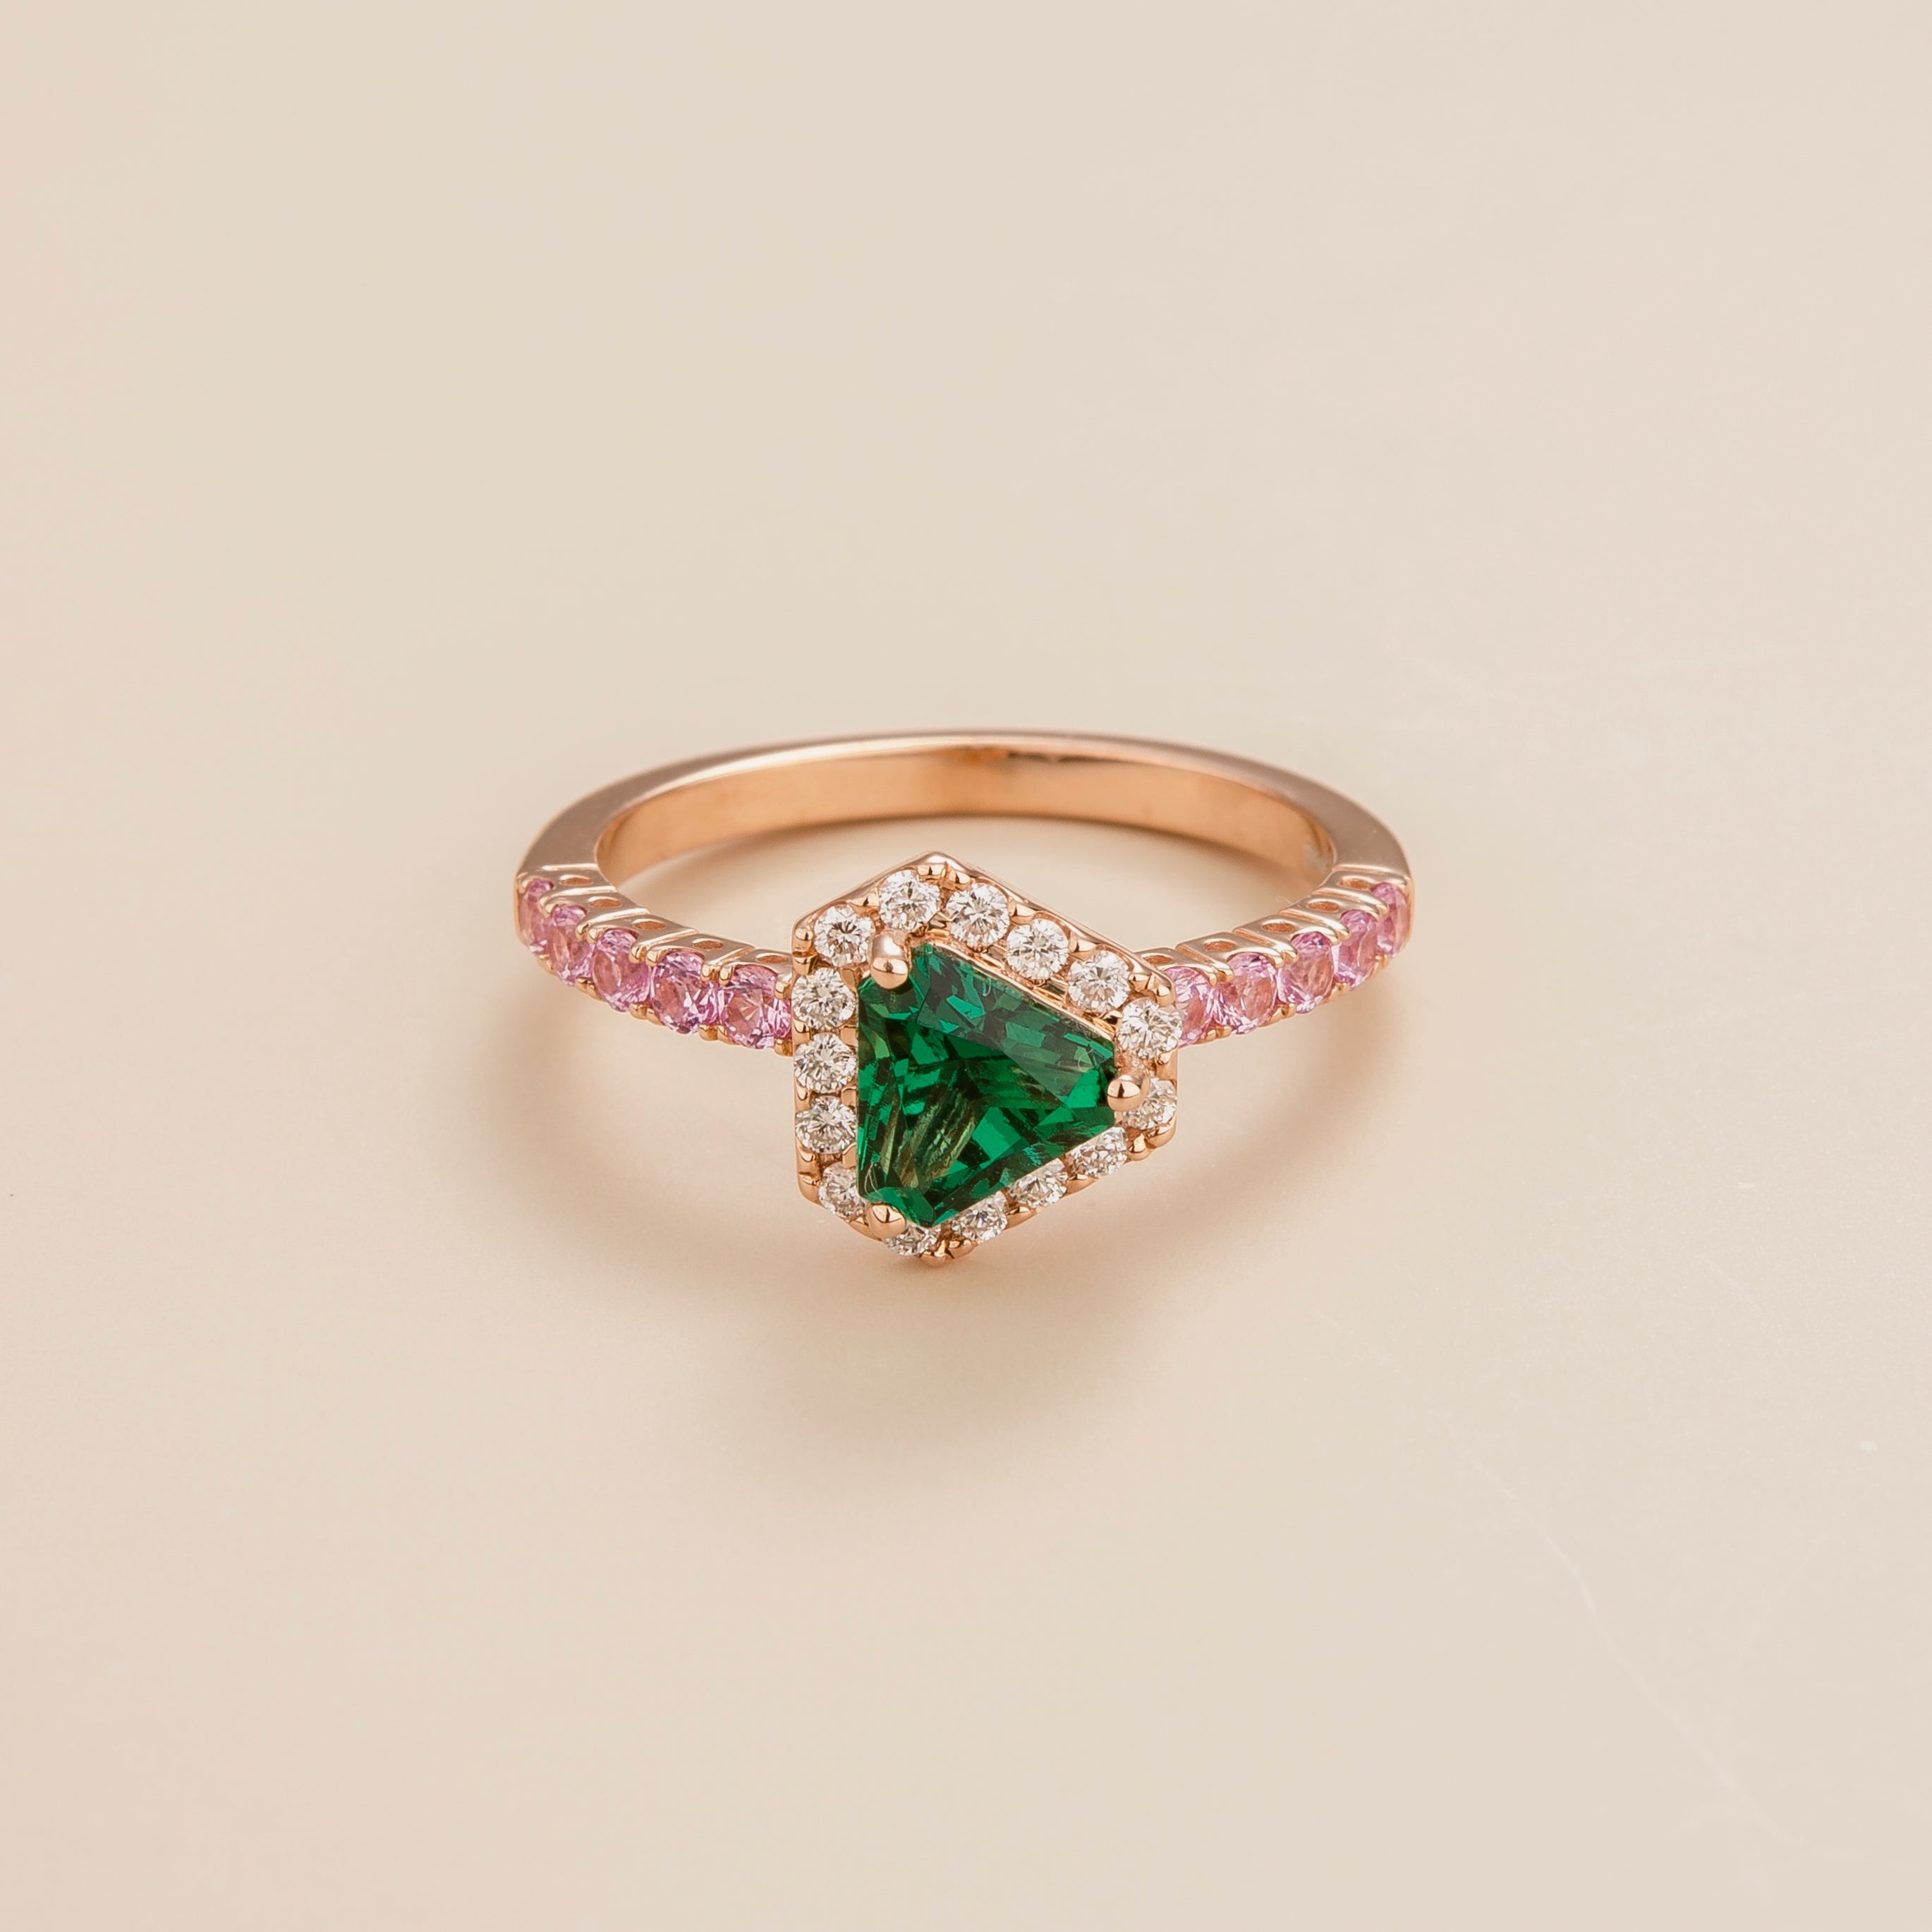 Diana ring in 18K pink gold vermeil set with lab grown diamond, emerald and pink sapphire gem stones.